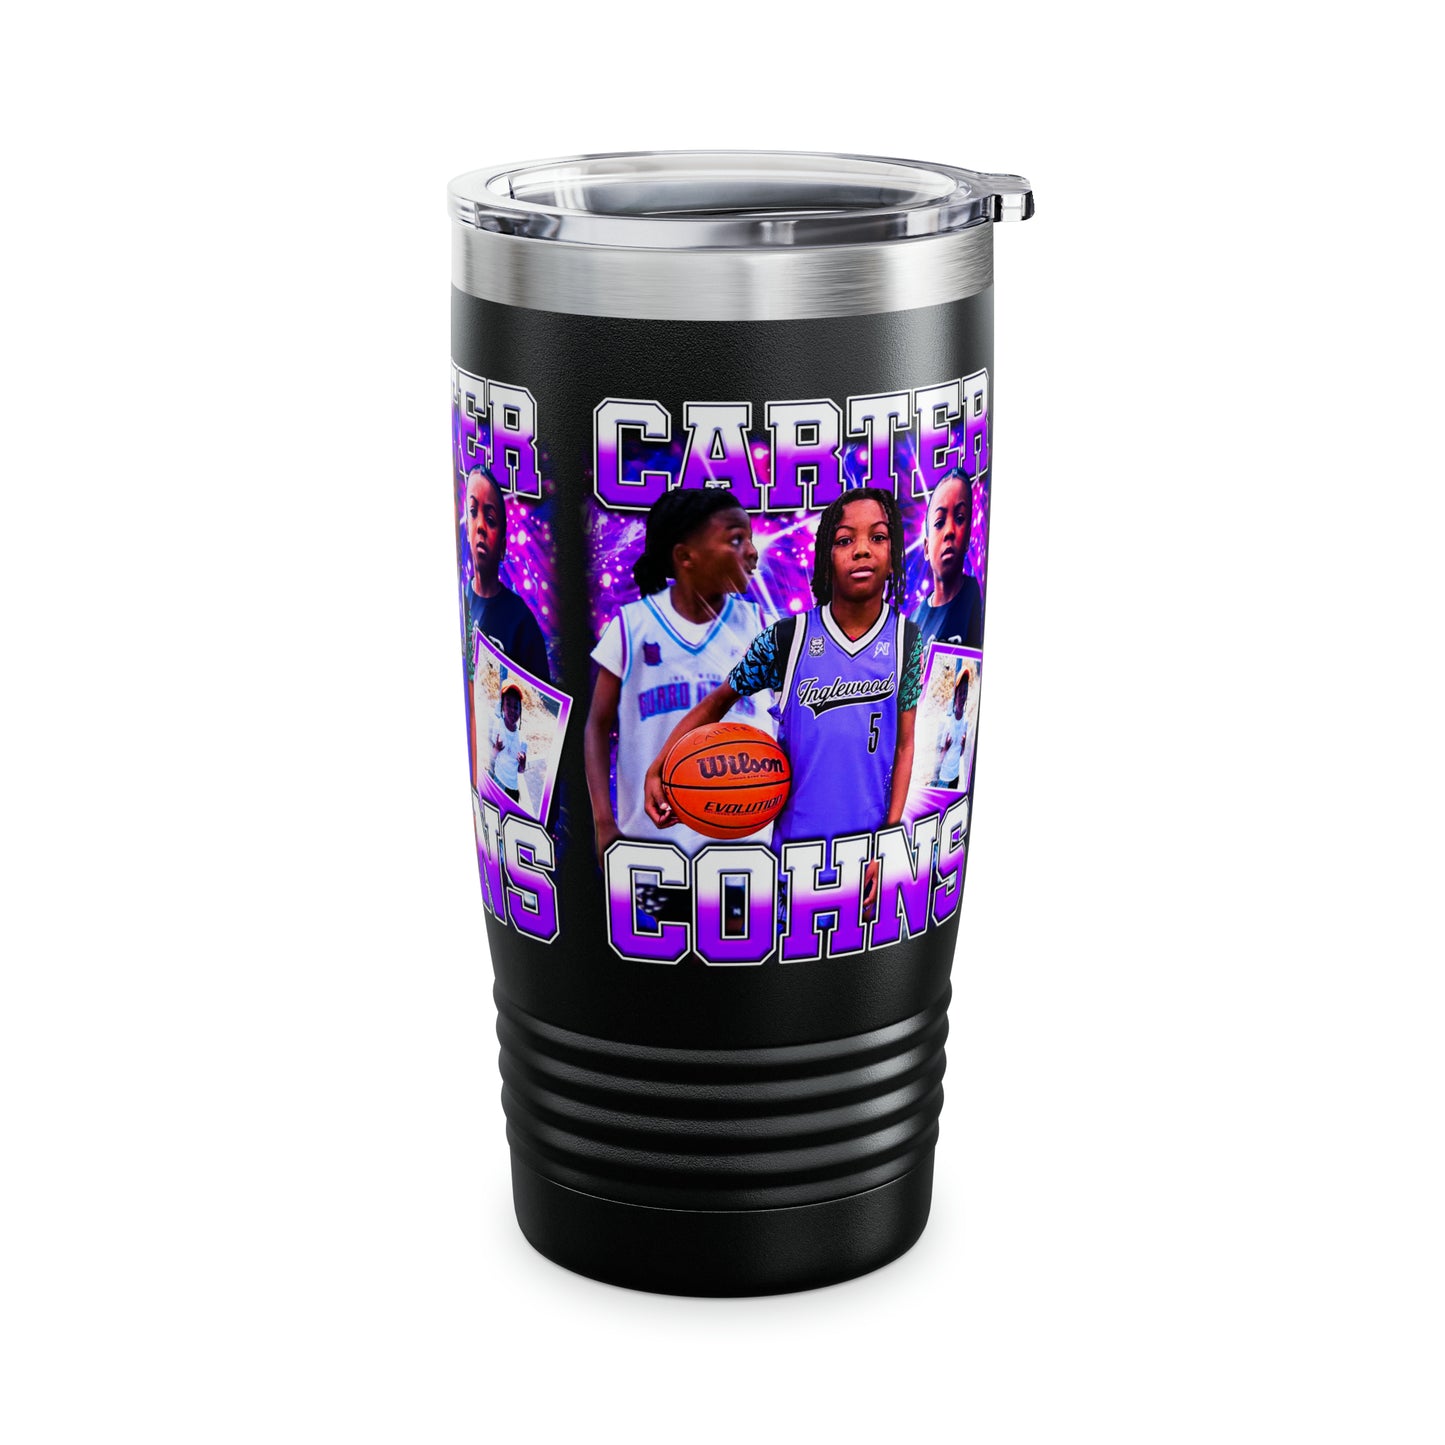 Carter Cohns Stainless Steel Tumbler